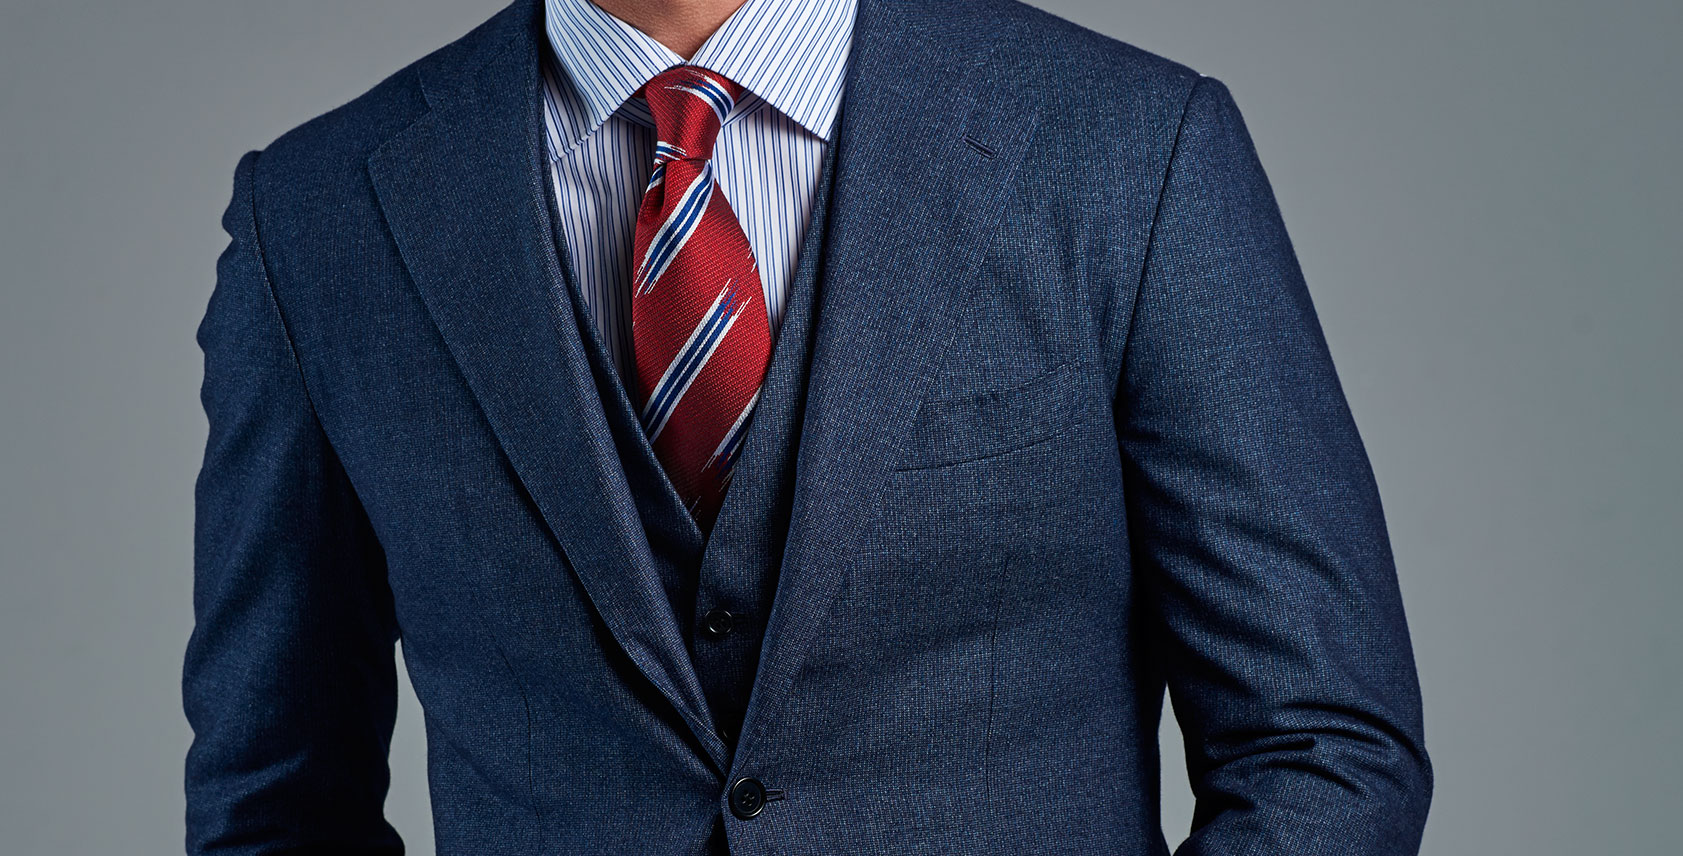 How To Be The Best Dressed Man In the Office